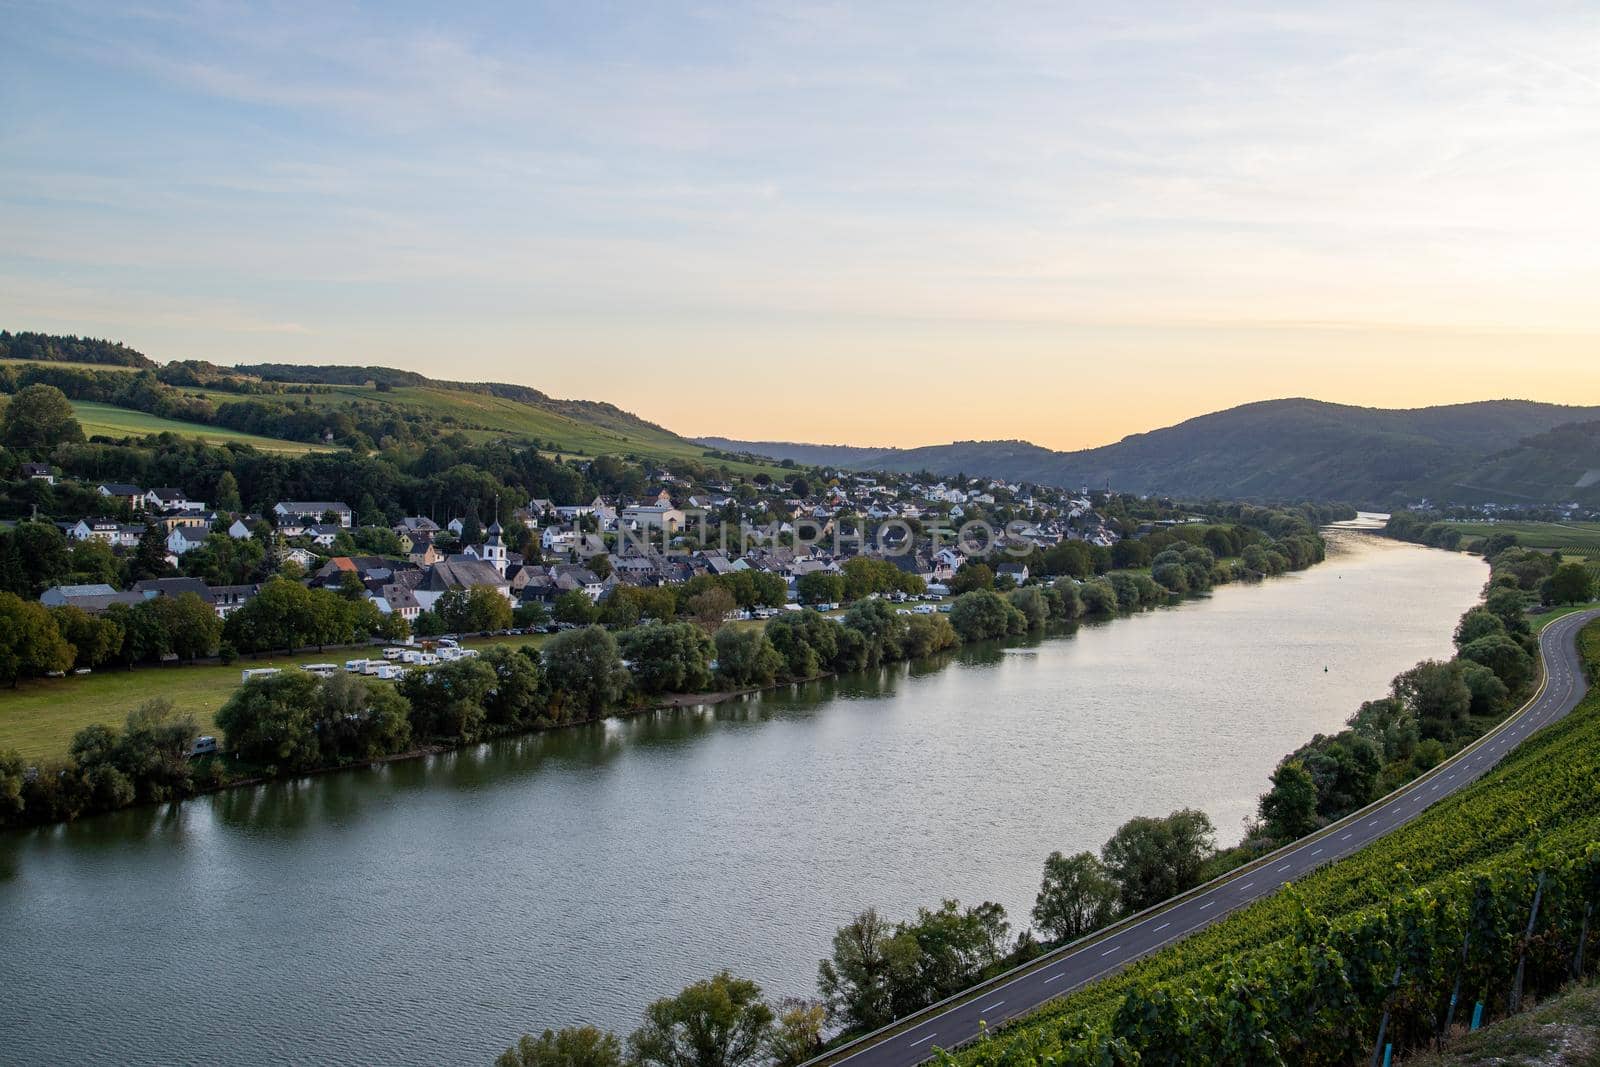 View of the Moselle valley at Brauneberg by reinerc